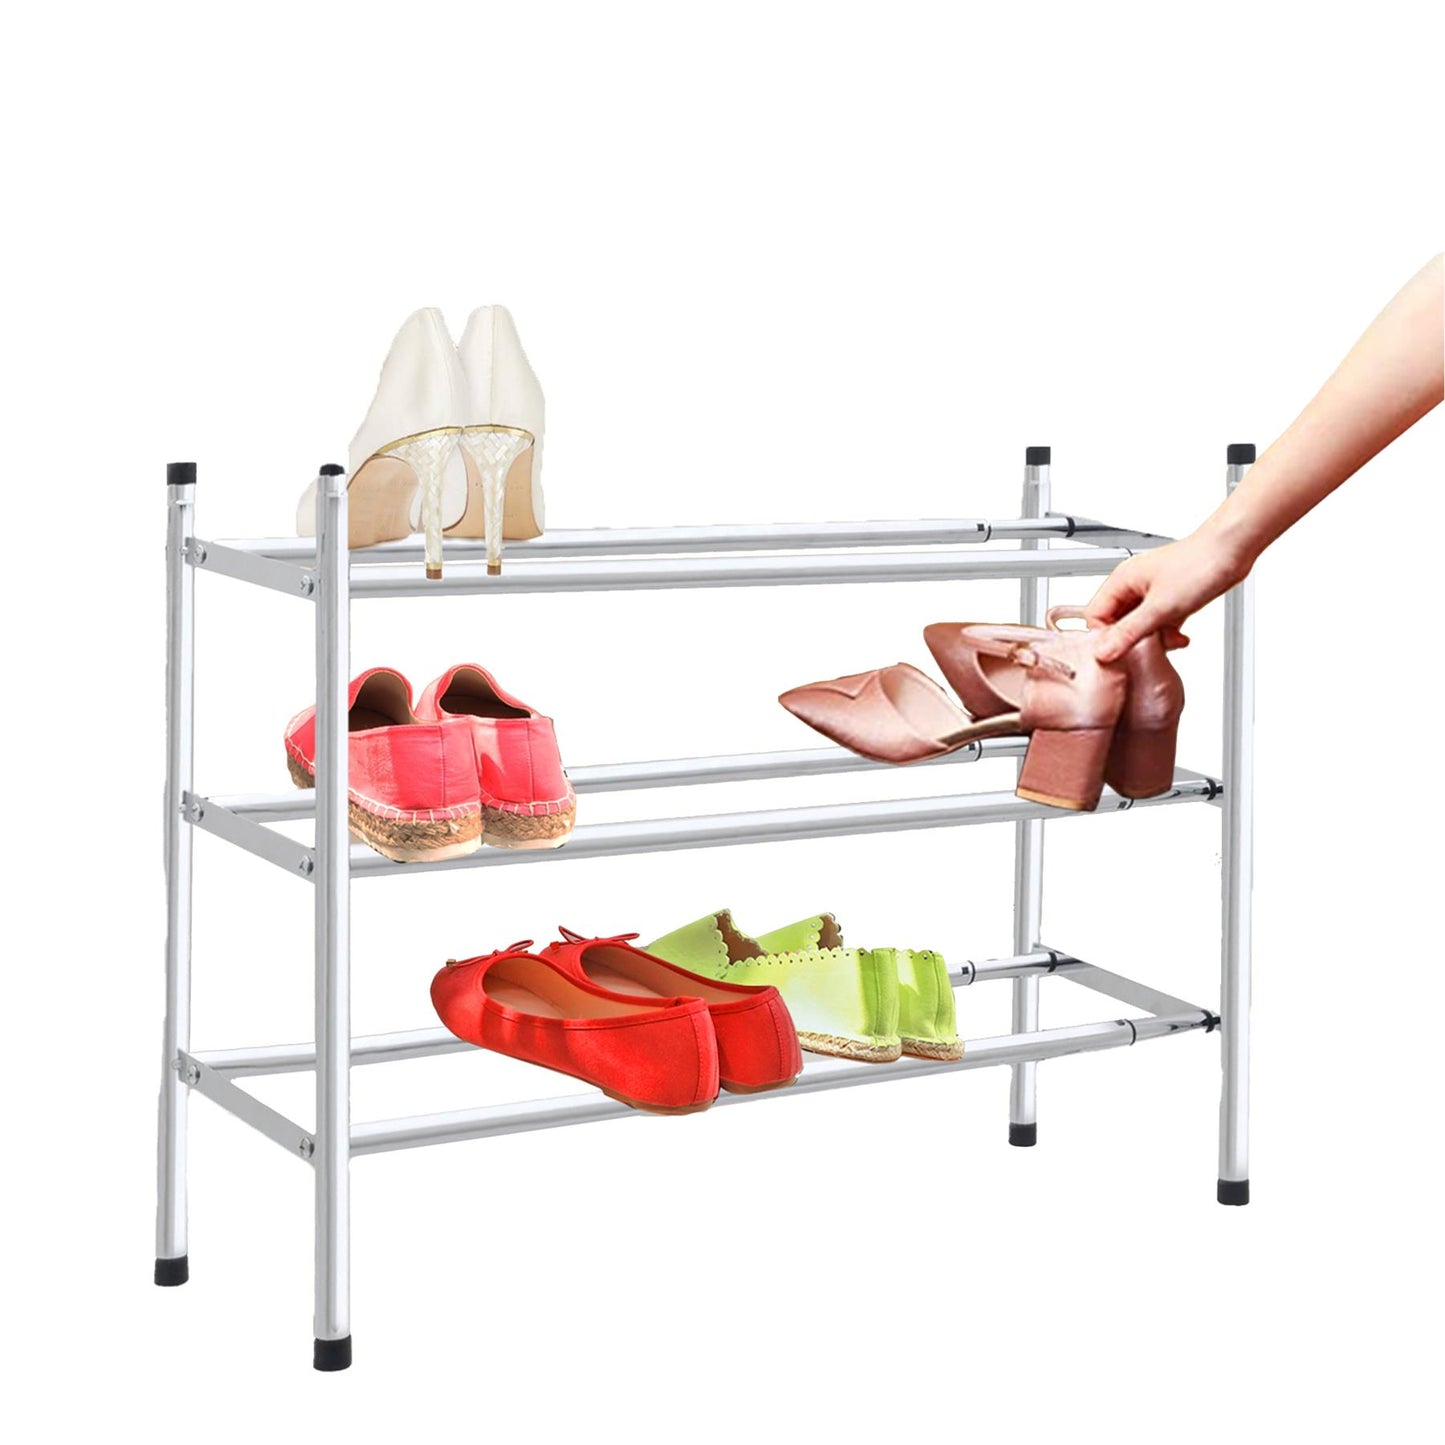 Sturdy 3-Tier Shoe Rack With Chrome Finish Holds Up To 18 Pairs Including Boots And Trainers